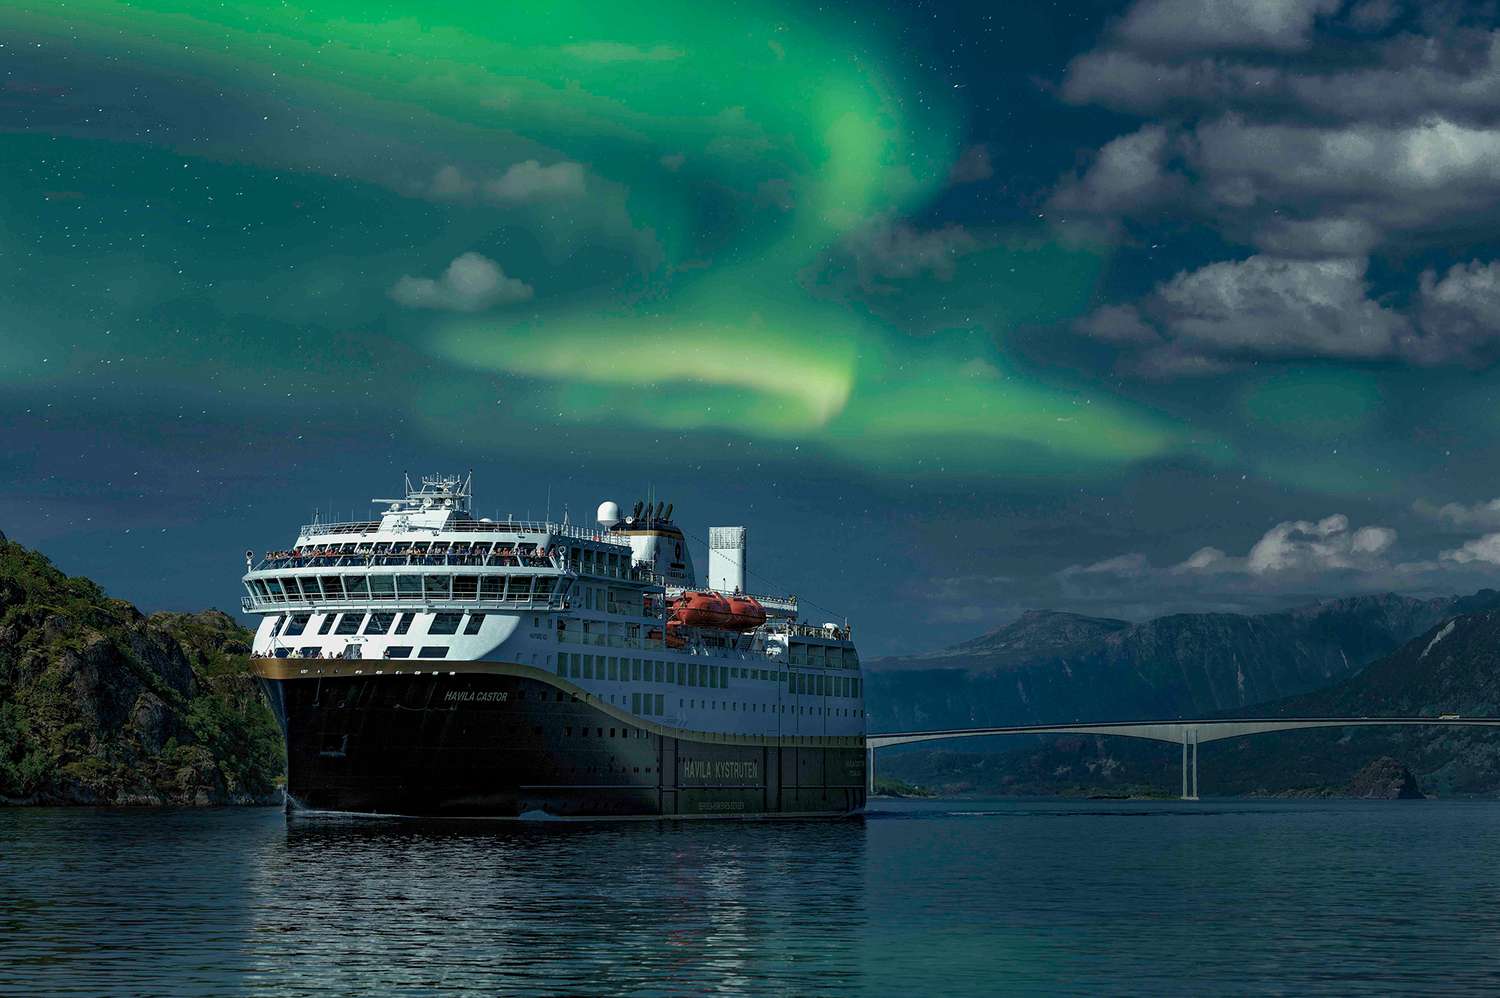 This 11-day Cruise Is One of the Best Ways to See the Northern Lights This Year